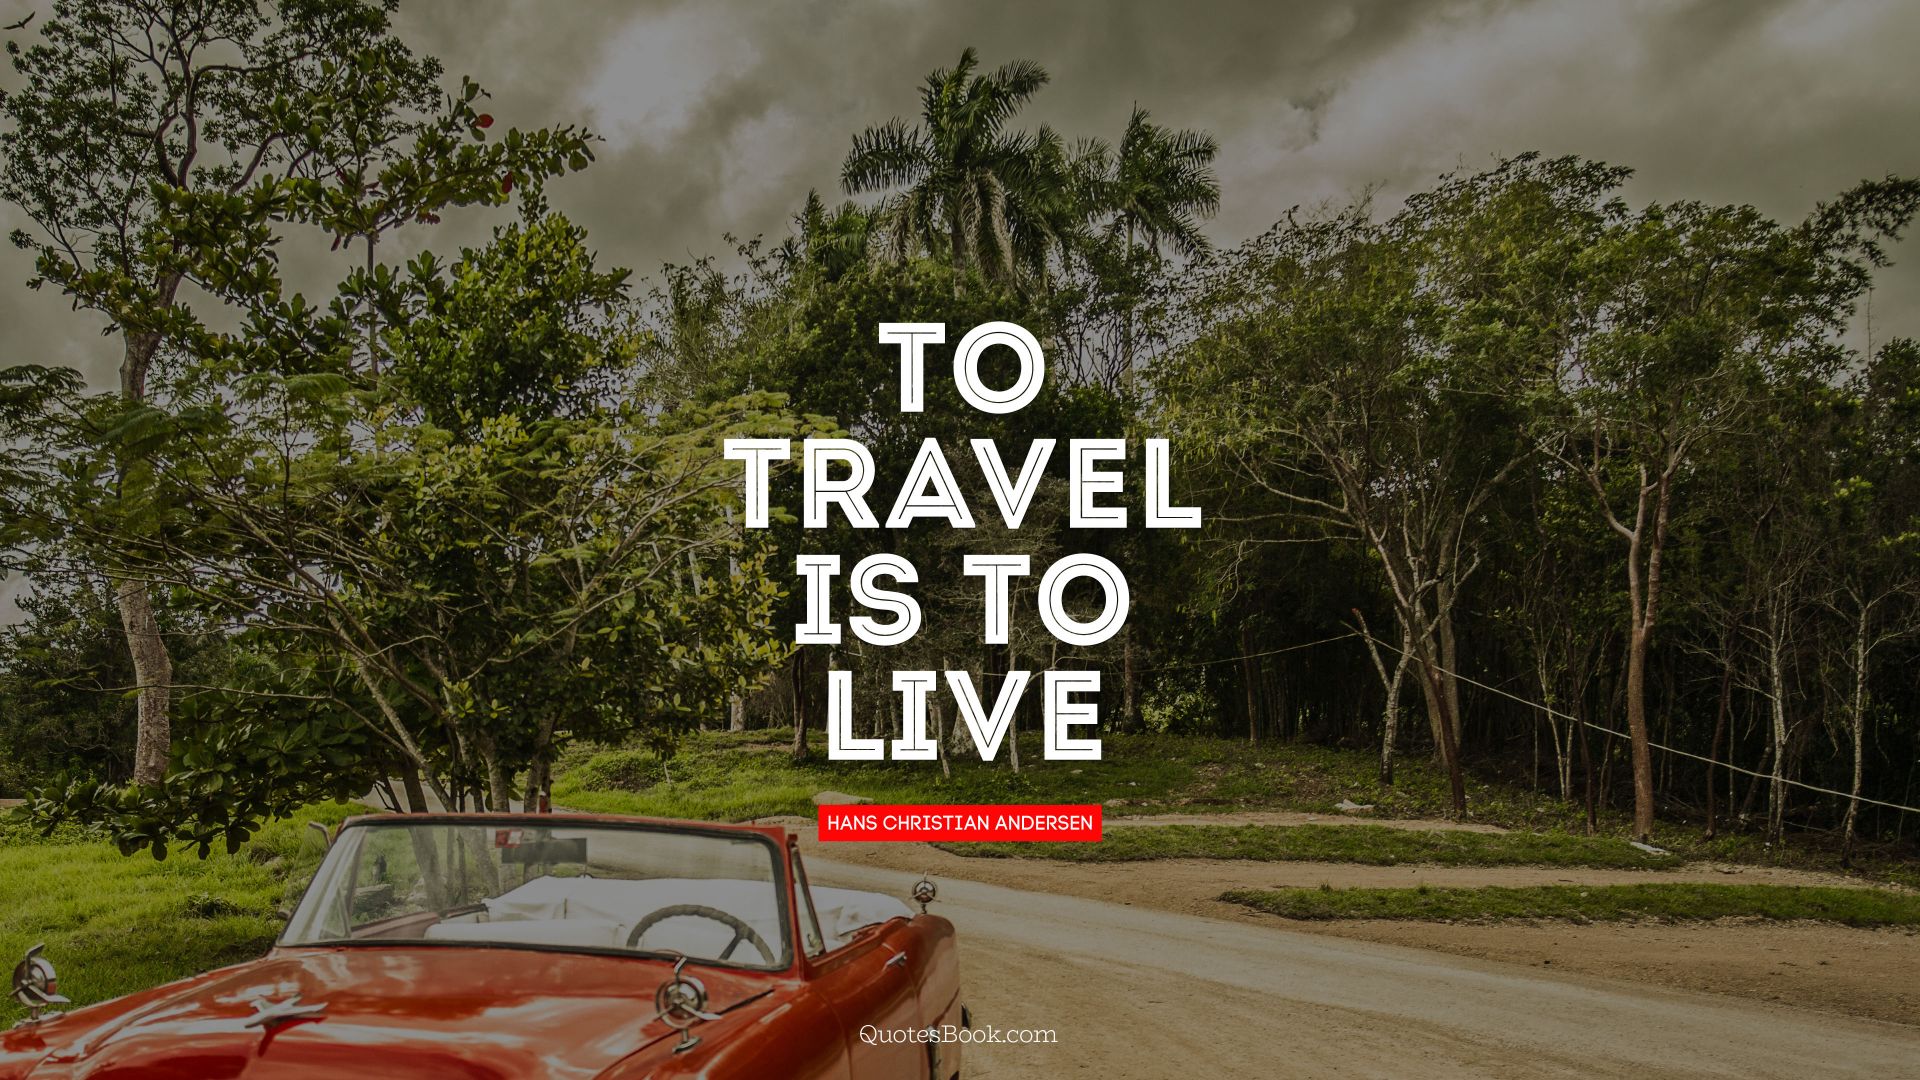 To travel is to live. - Quote by Hans Christian Andersen